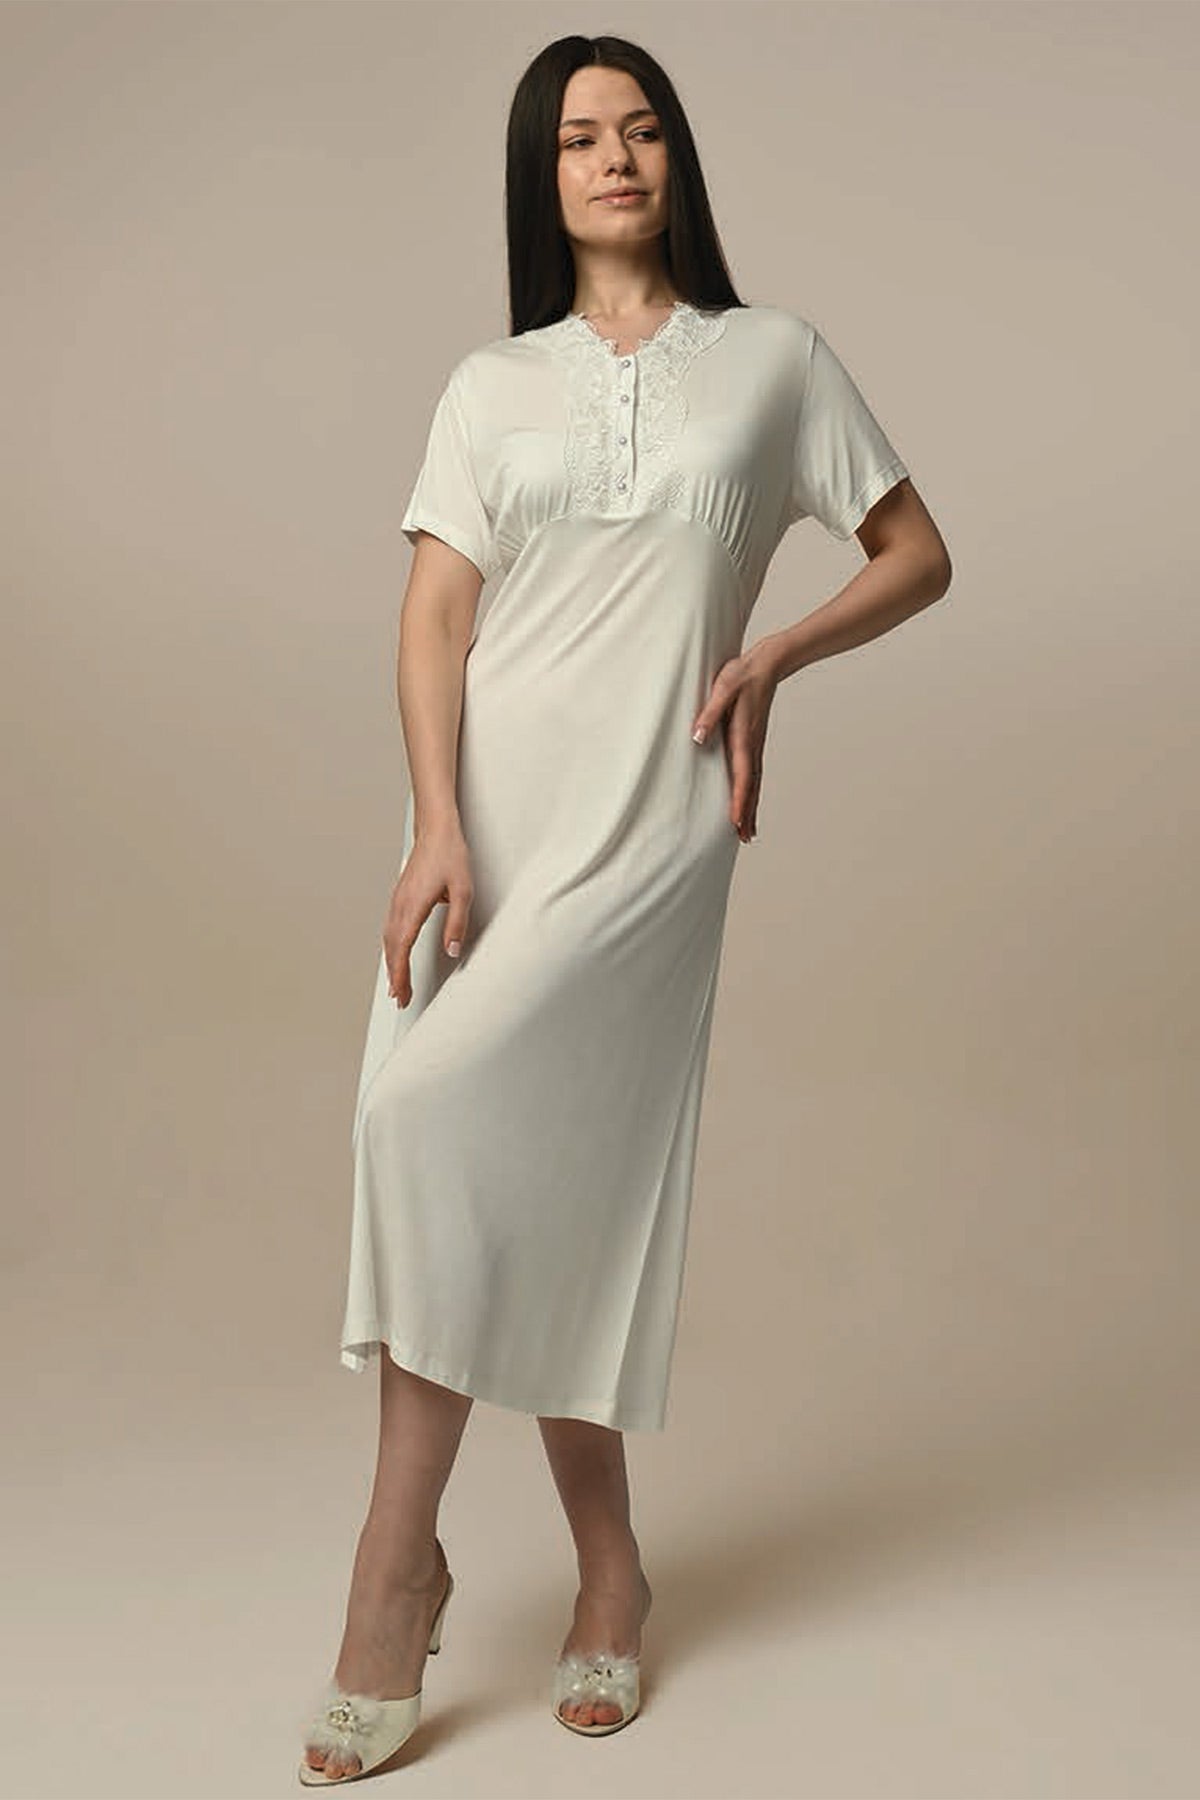 Lace Detailed Maternity & Nursing Nightgown With Robe Ecru - 24507